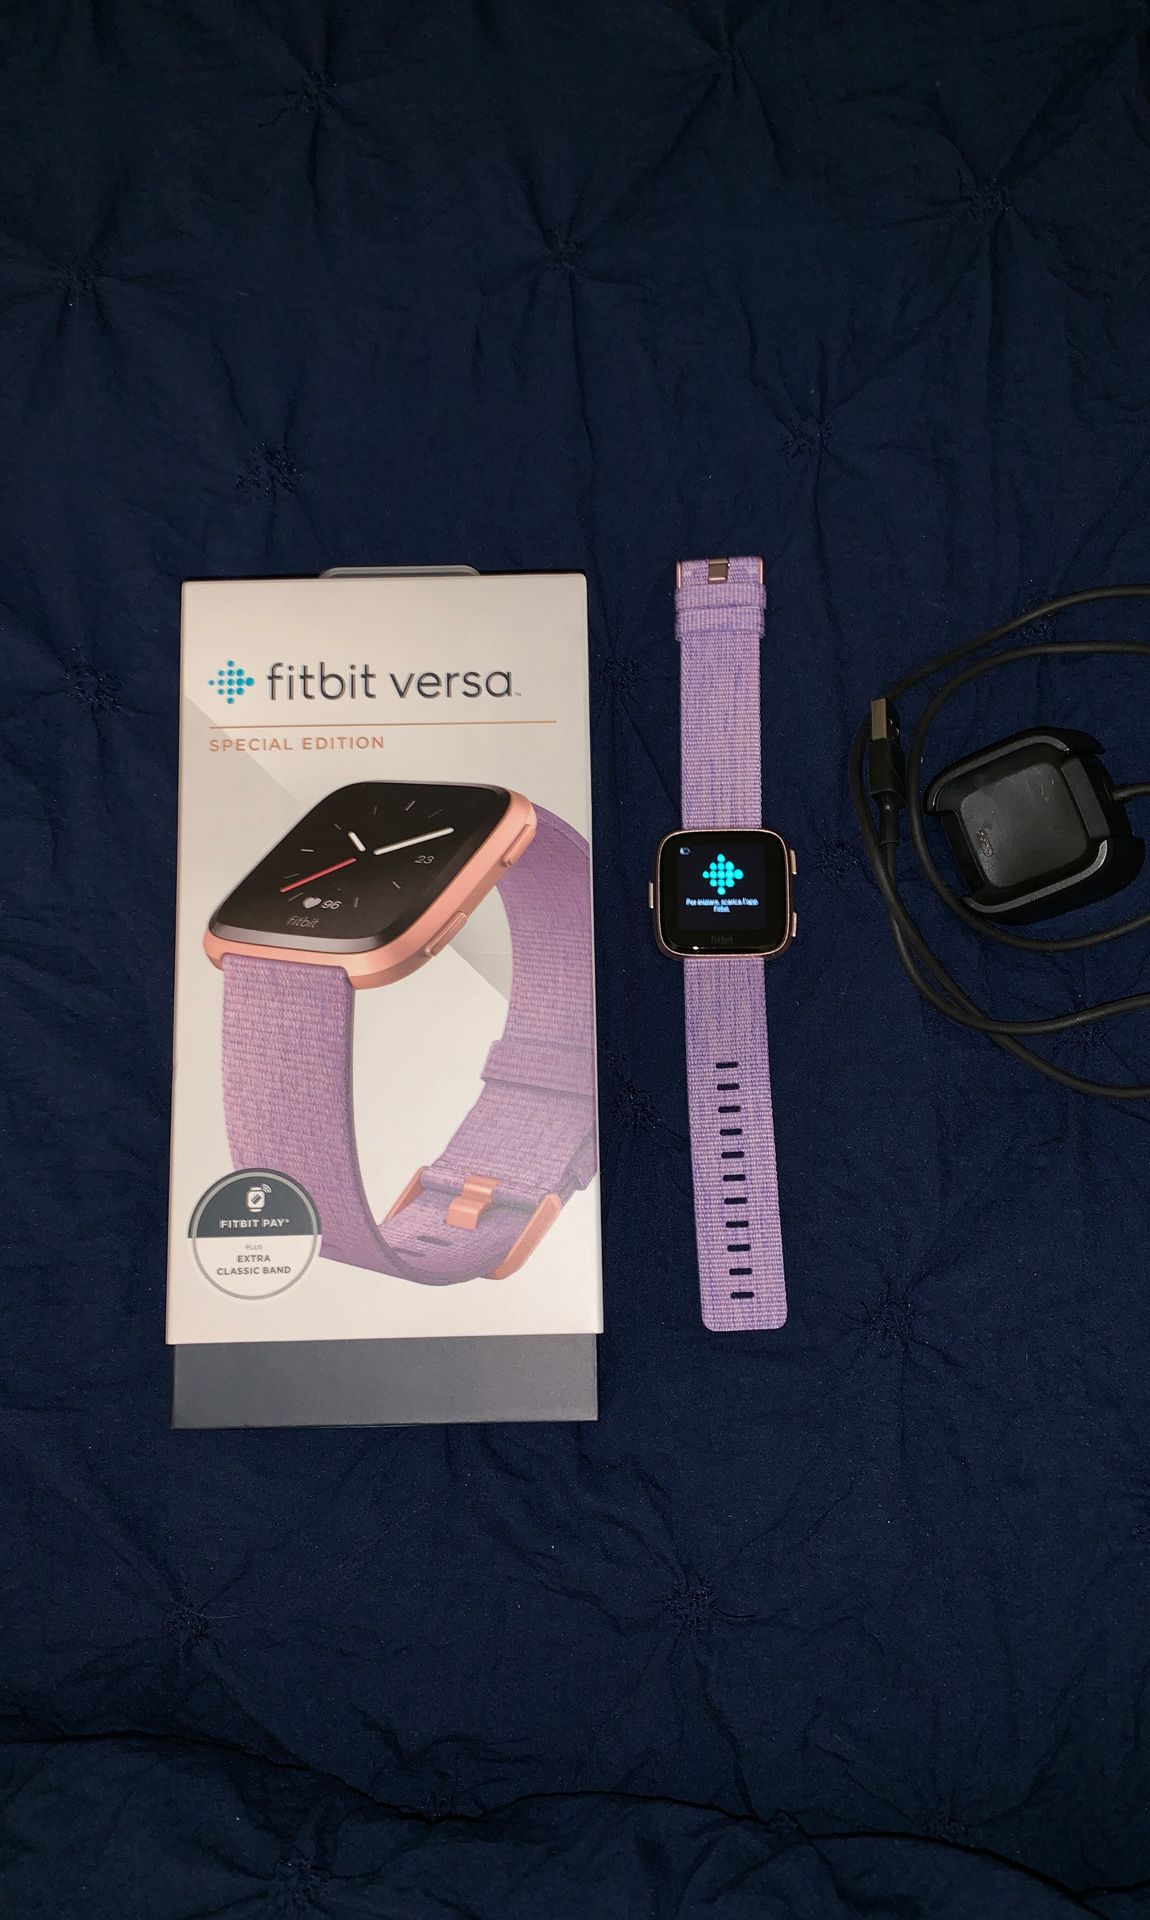 Used Fitbit Versa special edition